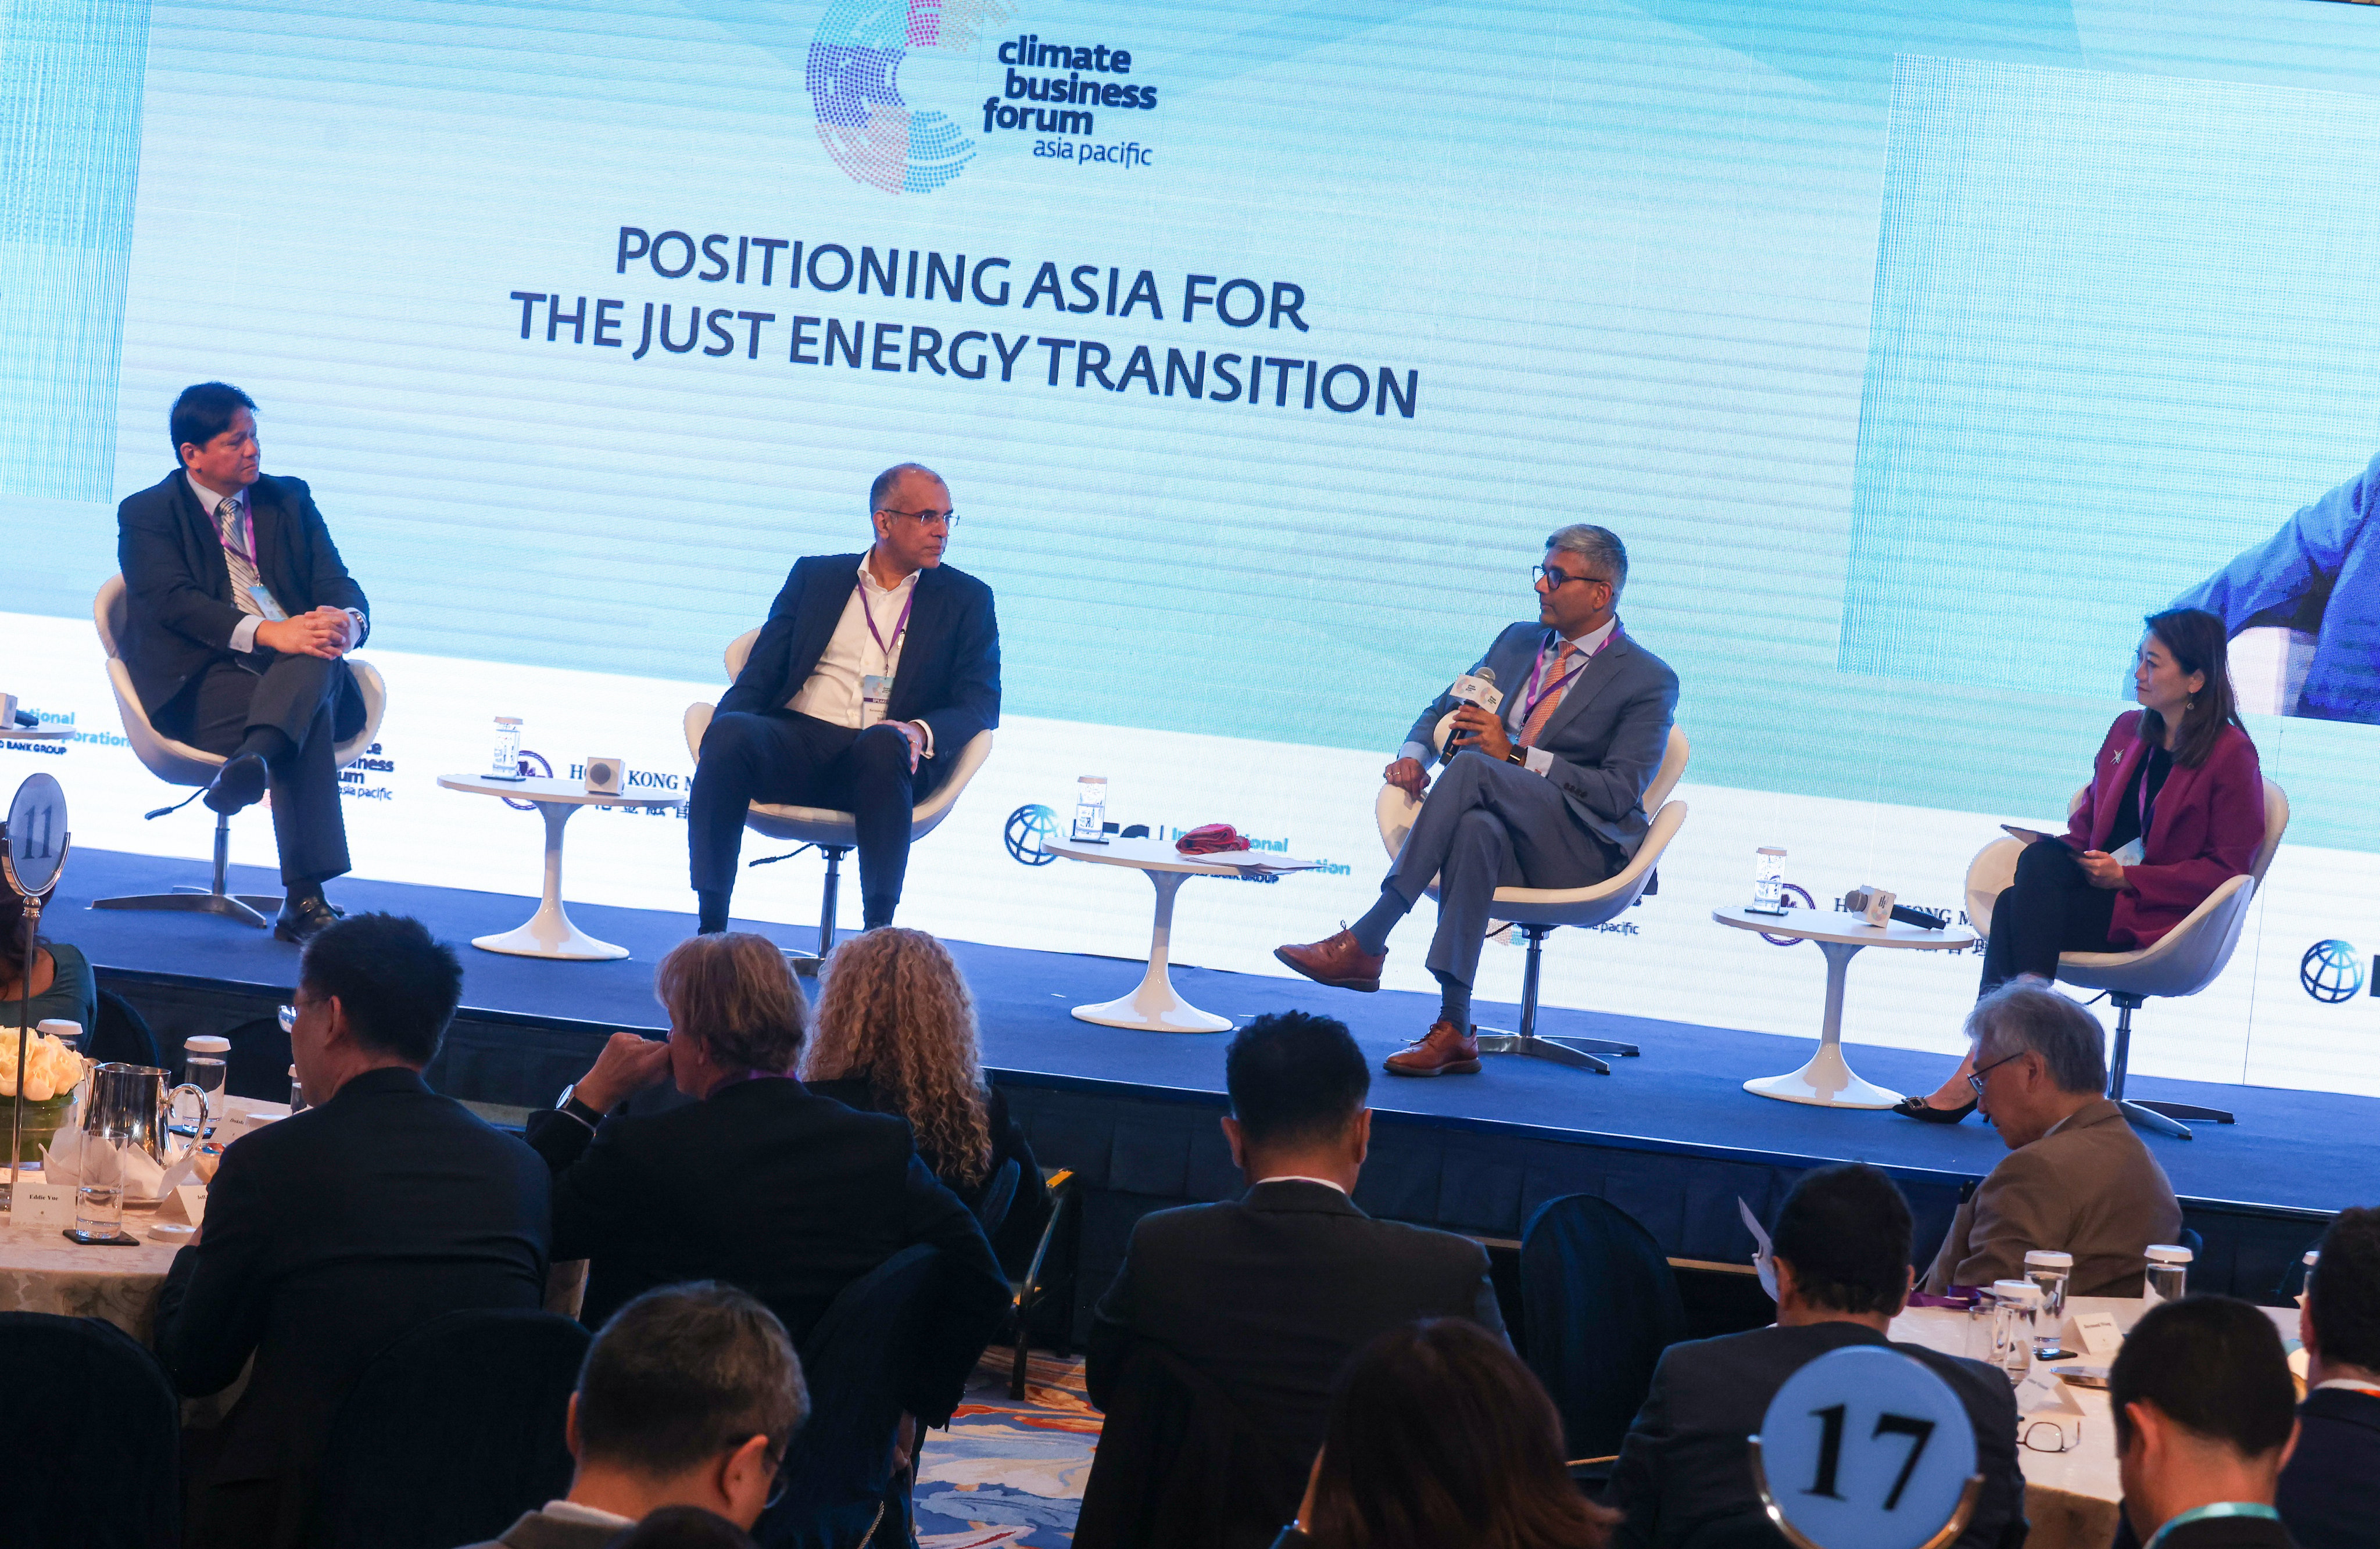 Banking and finance executives from leading institutions take part in a discussion at the Climate Business Forum, in Hong Kong, on Tuesday. Photo: Jonathan Wong